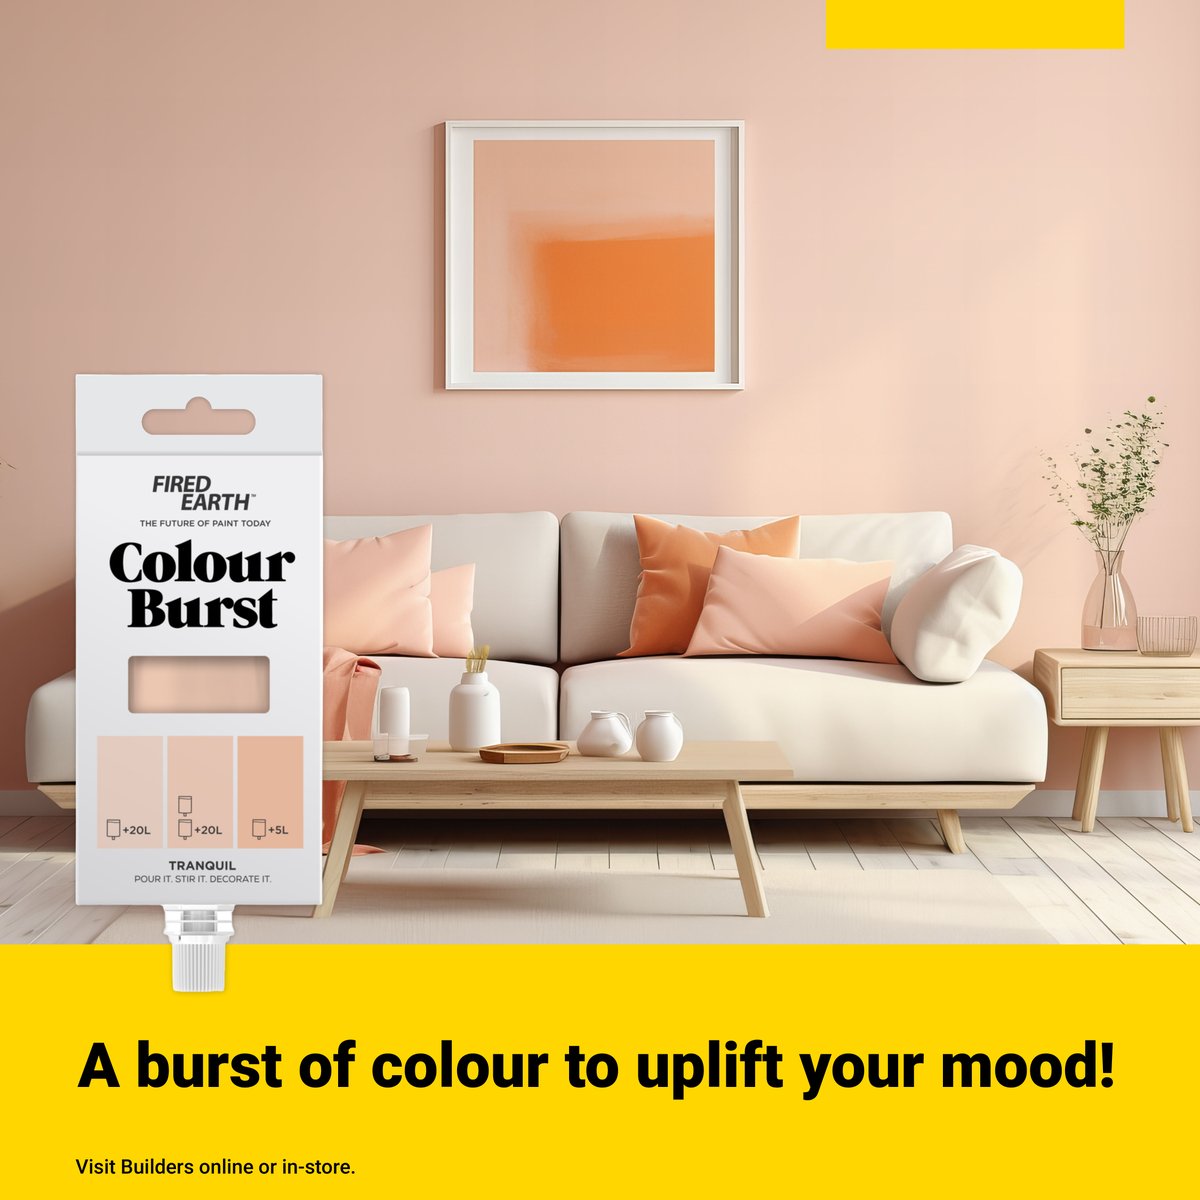 Bring a sense of comfort to your space. Builders has just what you need to create your very own shade of Pantone’s Colour of the Year - Peach Fuzz. Just add Fired Earth’s Tranquil Colour Burst packet to white paint and mix it well. It’s ready for use:bit.ly/3TqDukq